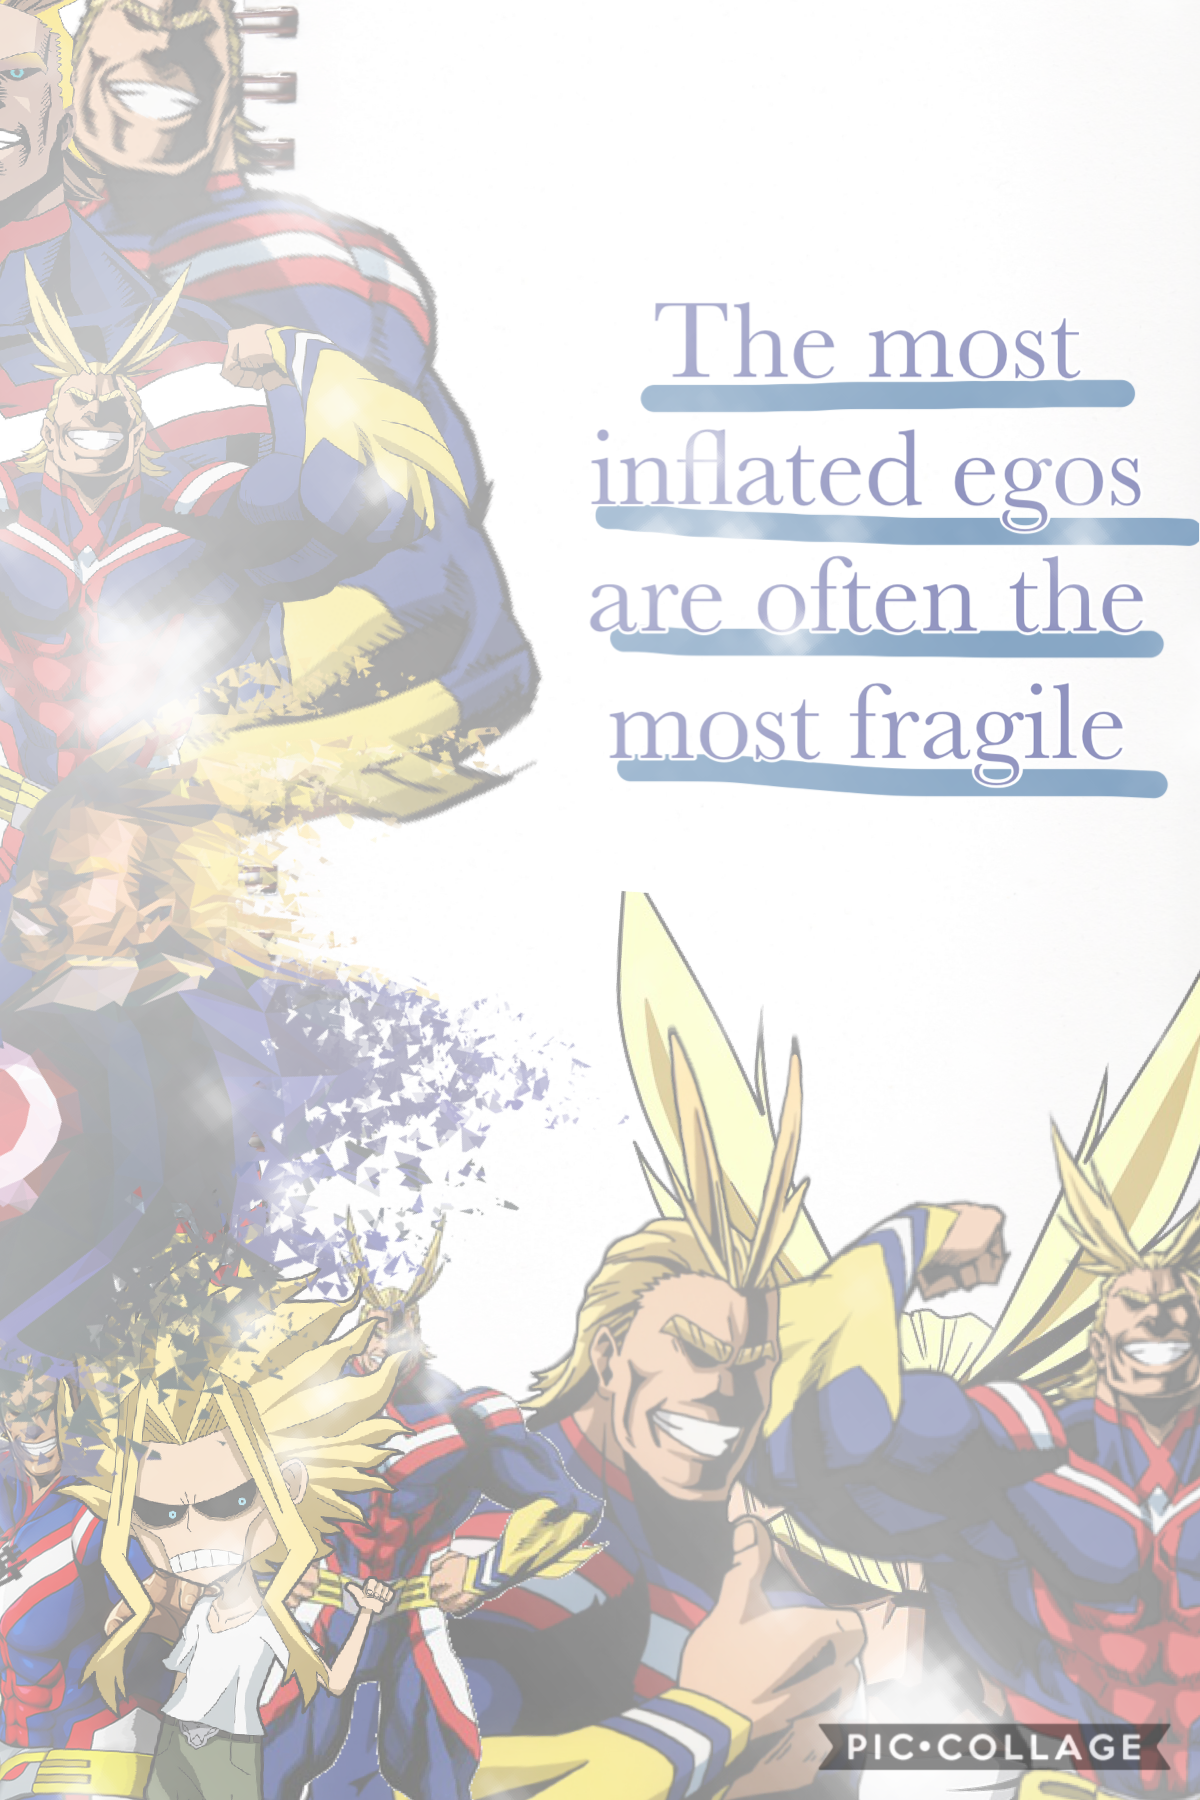 All Might